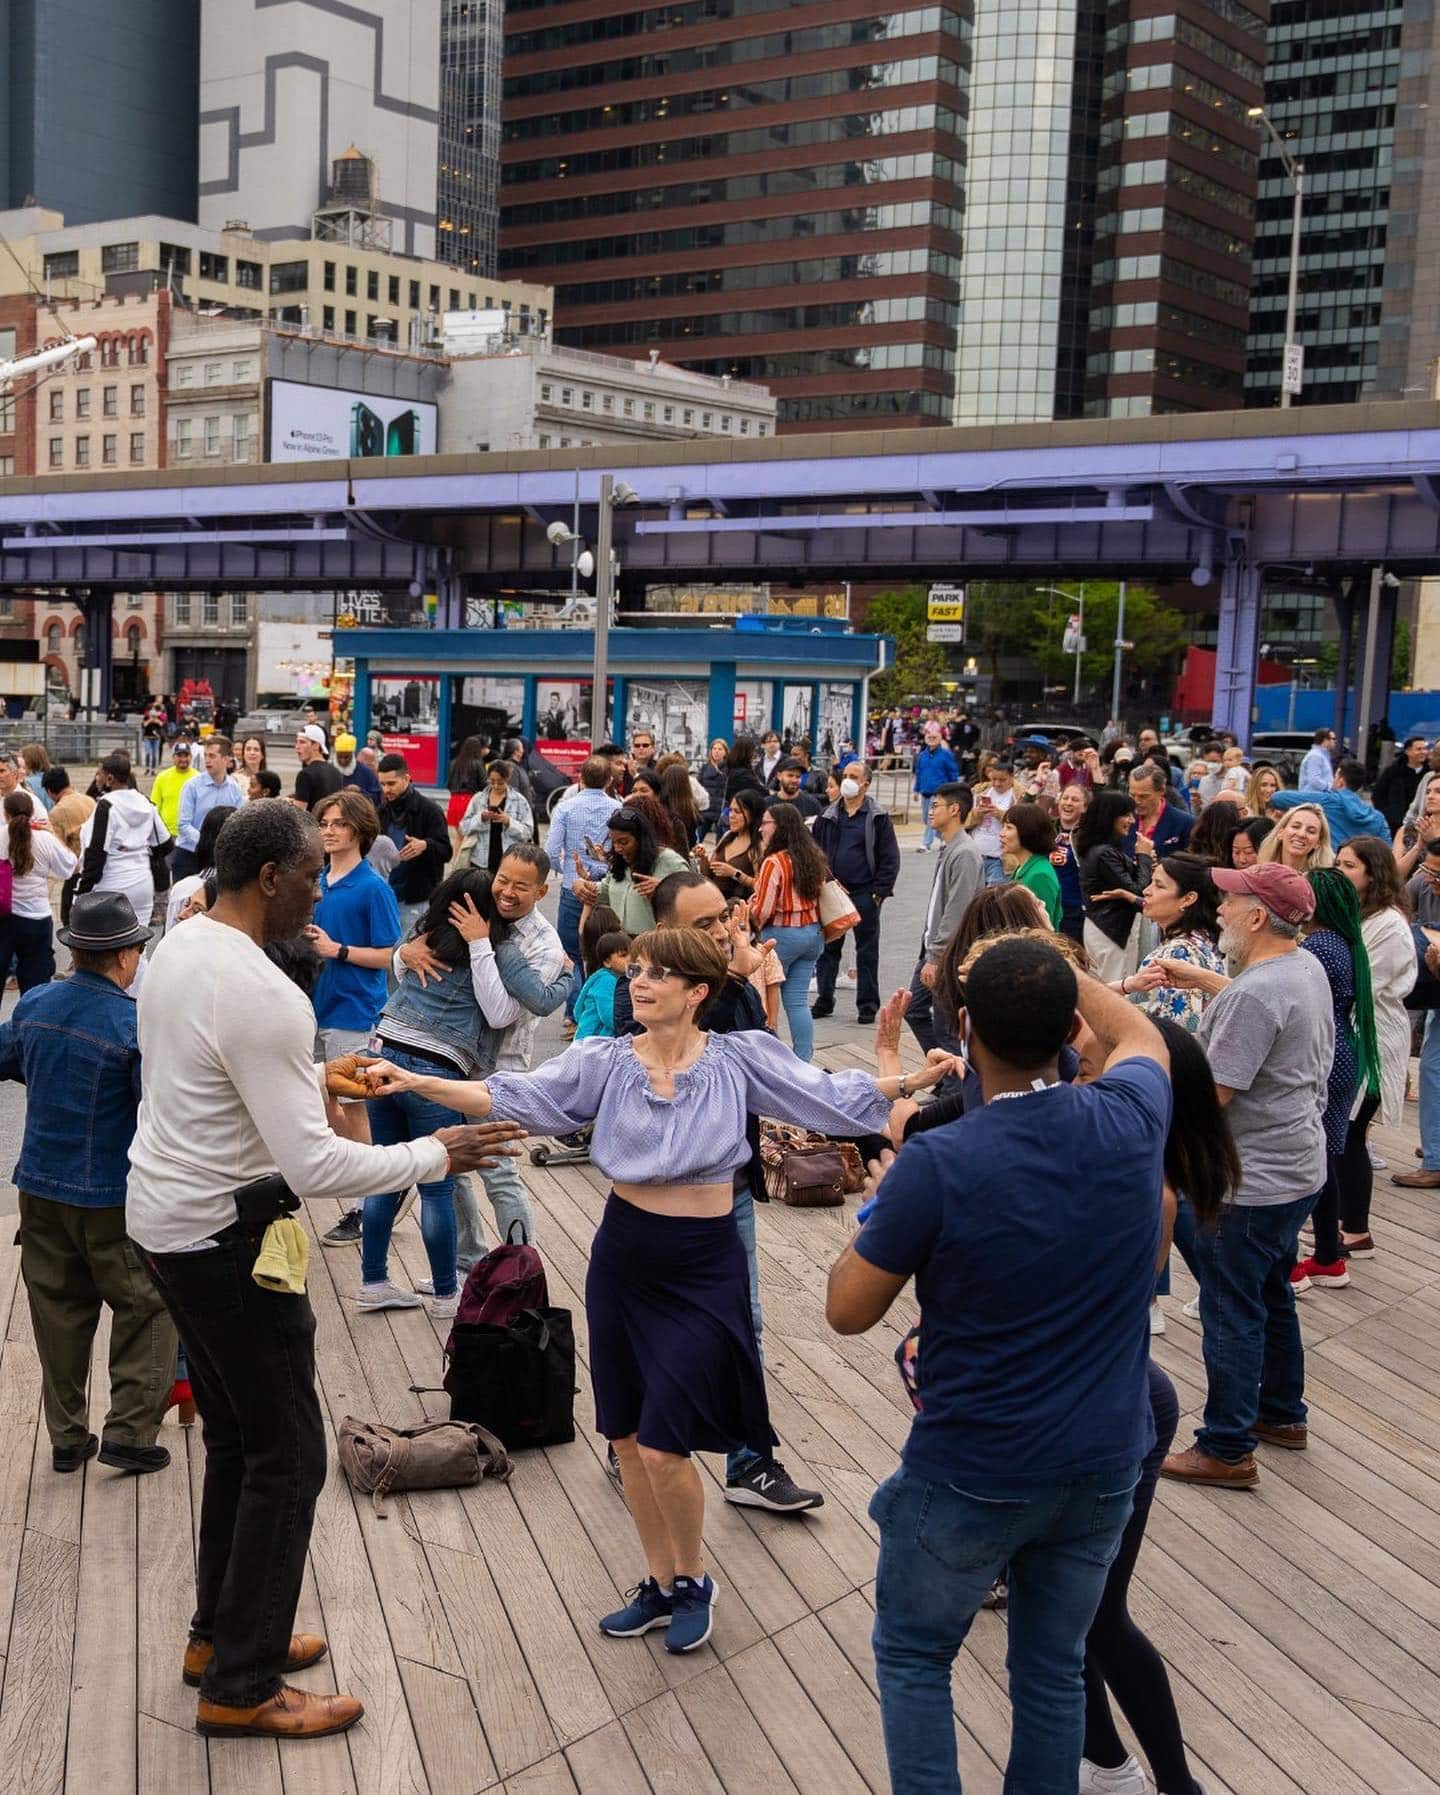 Live band. Interactive dance lesson. Time to free style. It’s almost time to salsa your way into Cinco de Mayo weekend at #TheSeaport  🗓️ 5/5 | 6pm Presented by Heineken. RSVP ➤ link in bio. #SeaportSounds